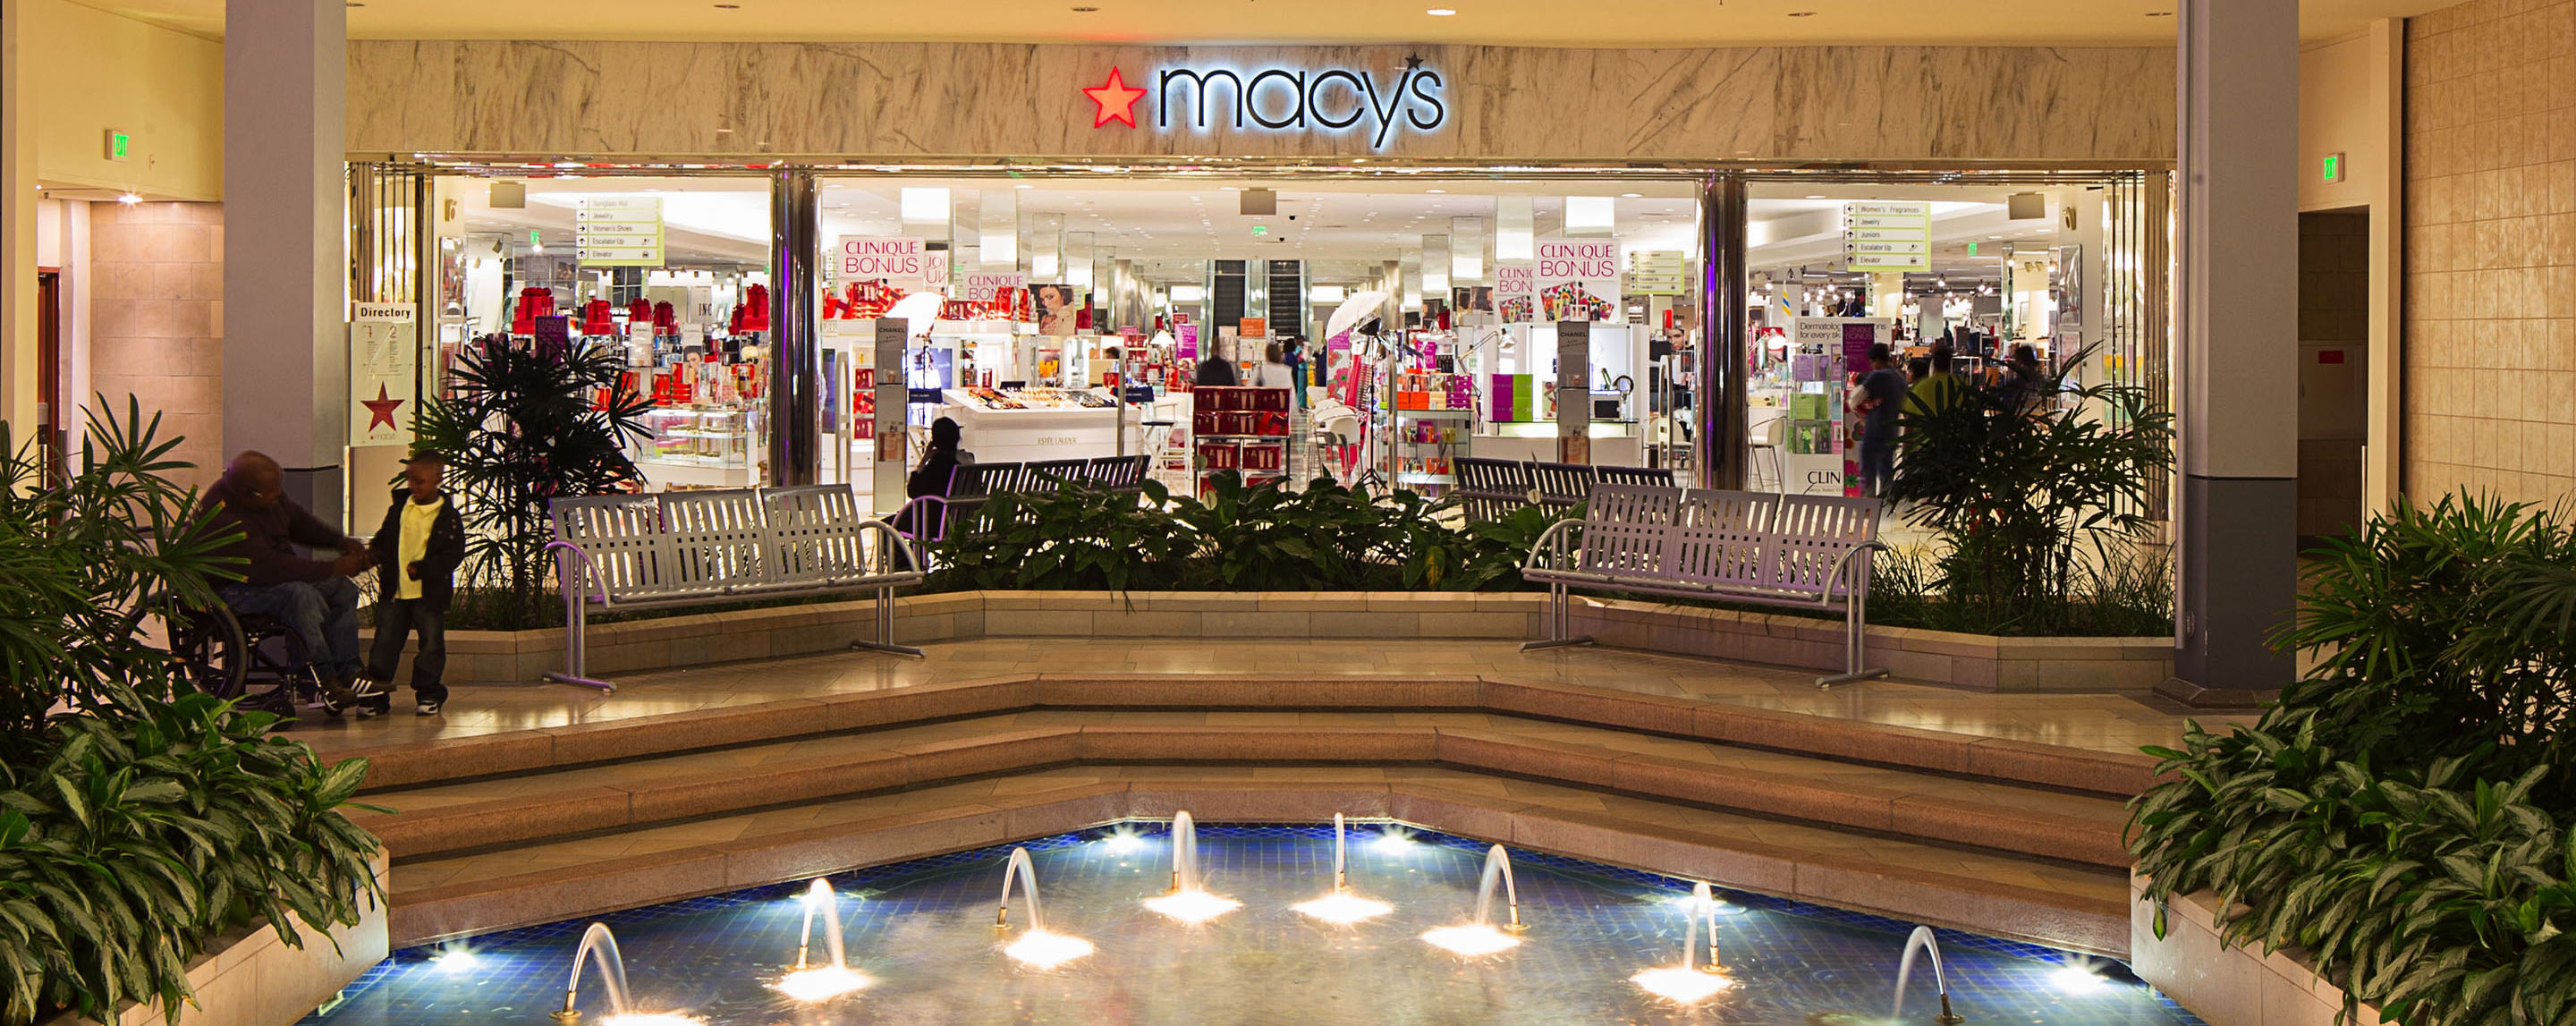 Fountains shoot out water in a fountain with benches in front of a Macy's located in a shopping mall.